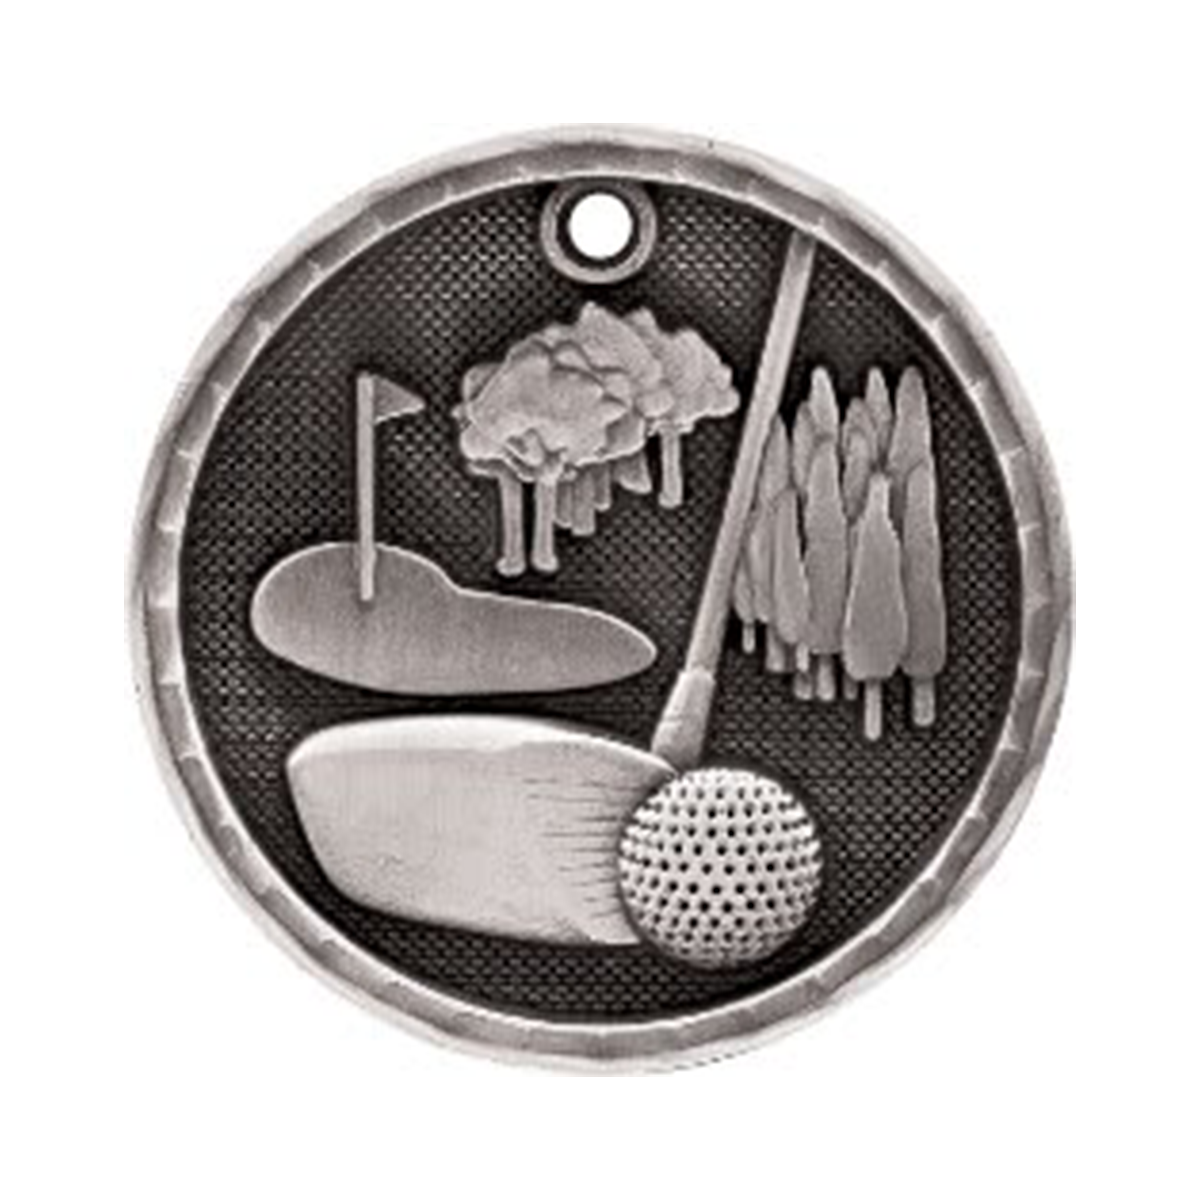 3D Golf Medal in Antique Gold, Silver and Bronze